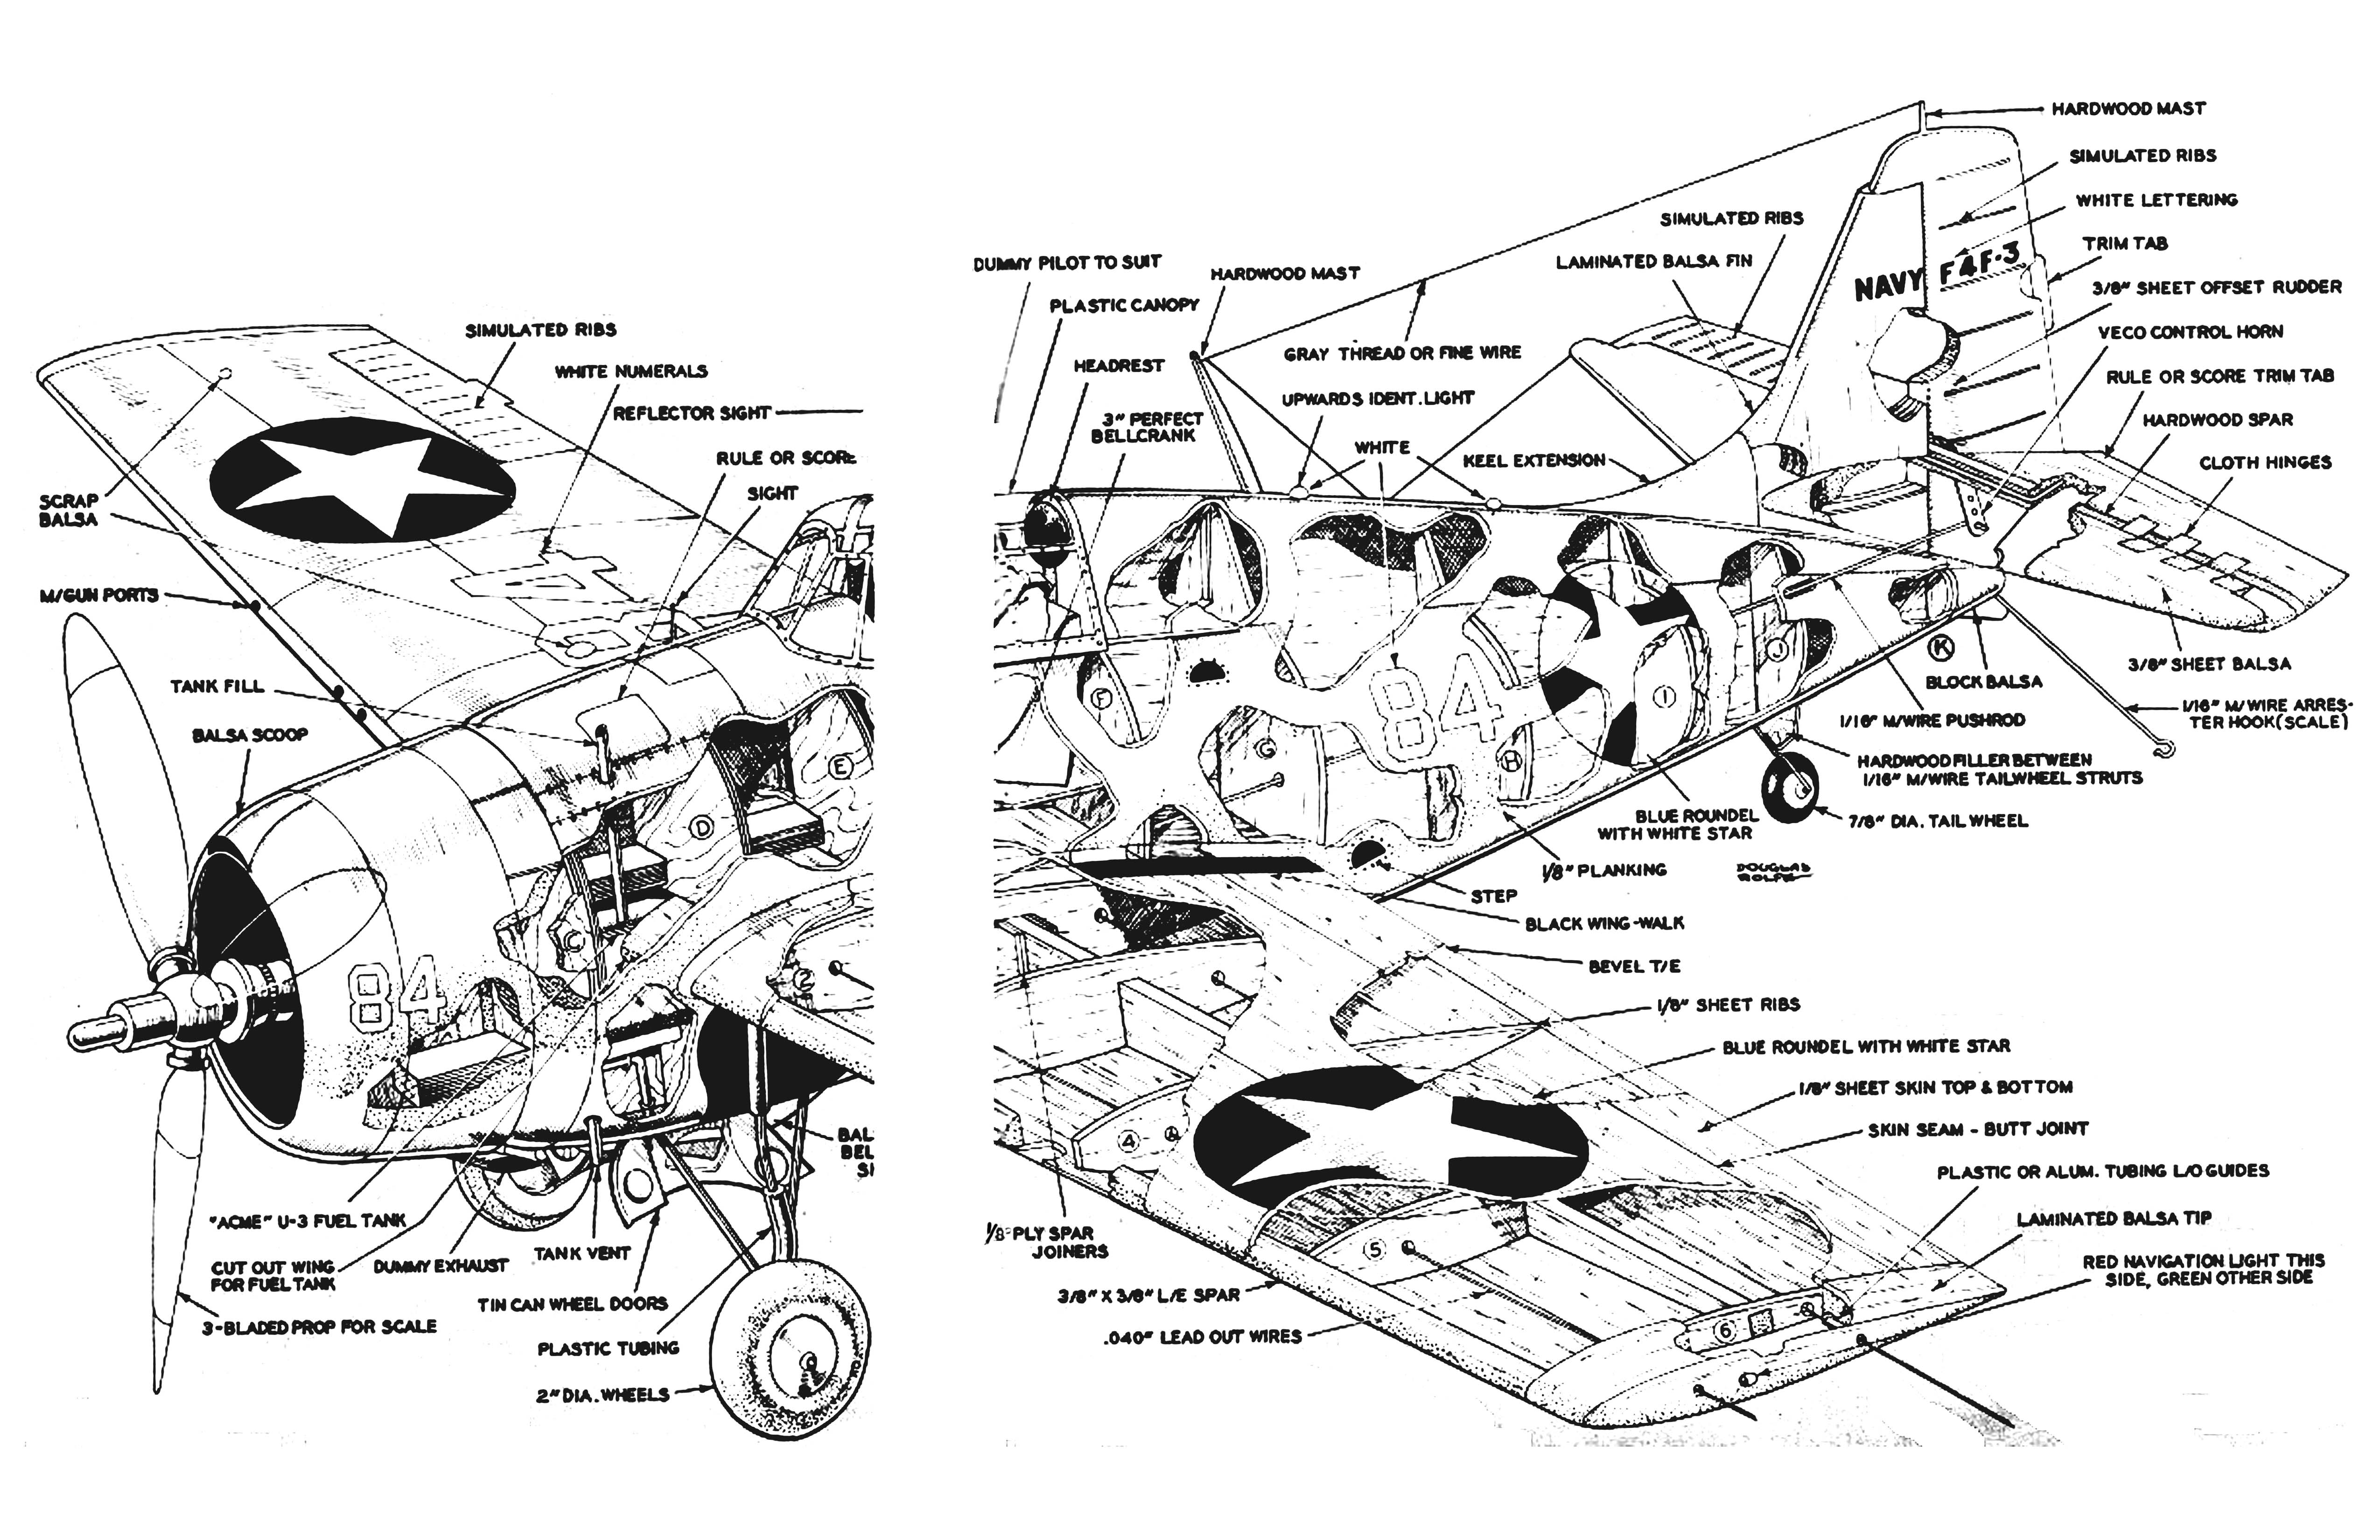 full size printed plans  control line  scale 1:12 f4f-3 grumman wildcat detailed plans